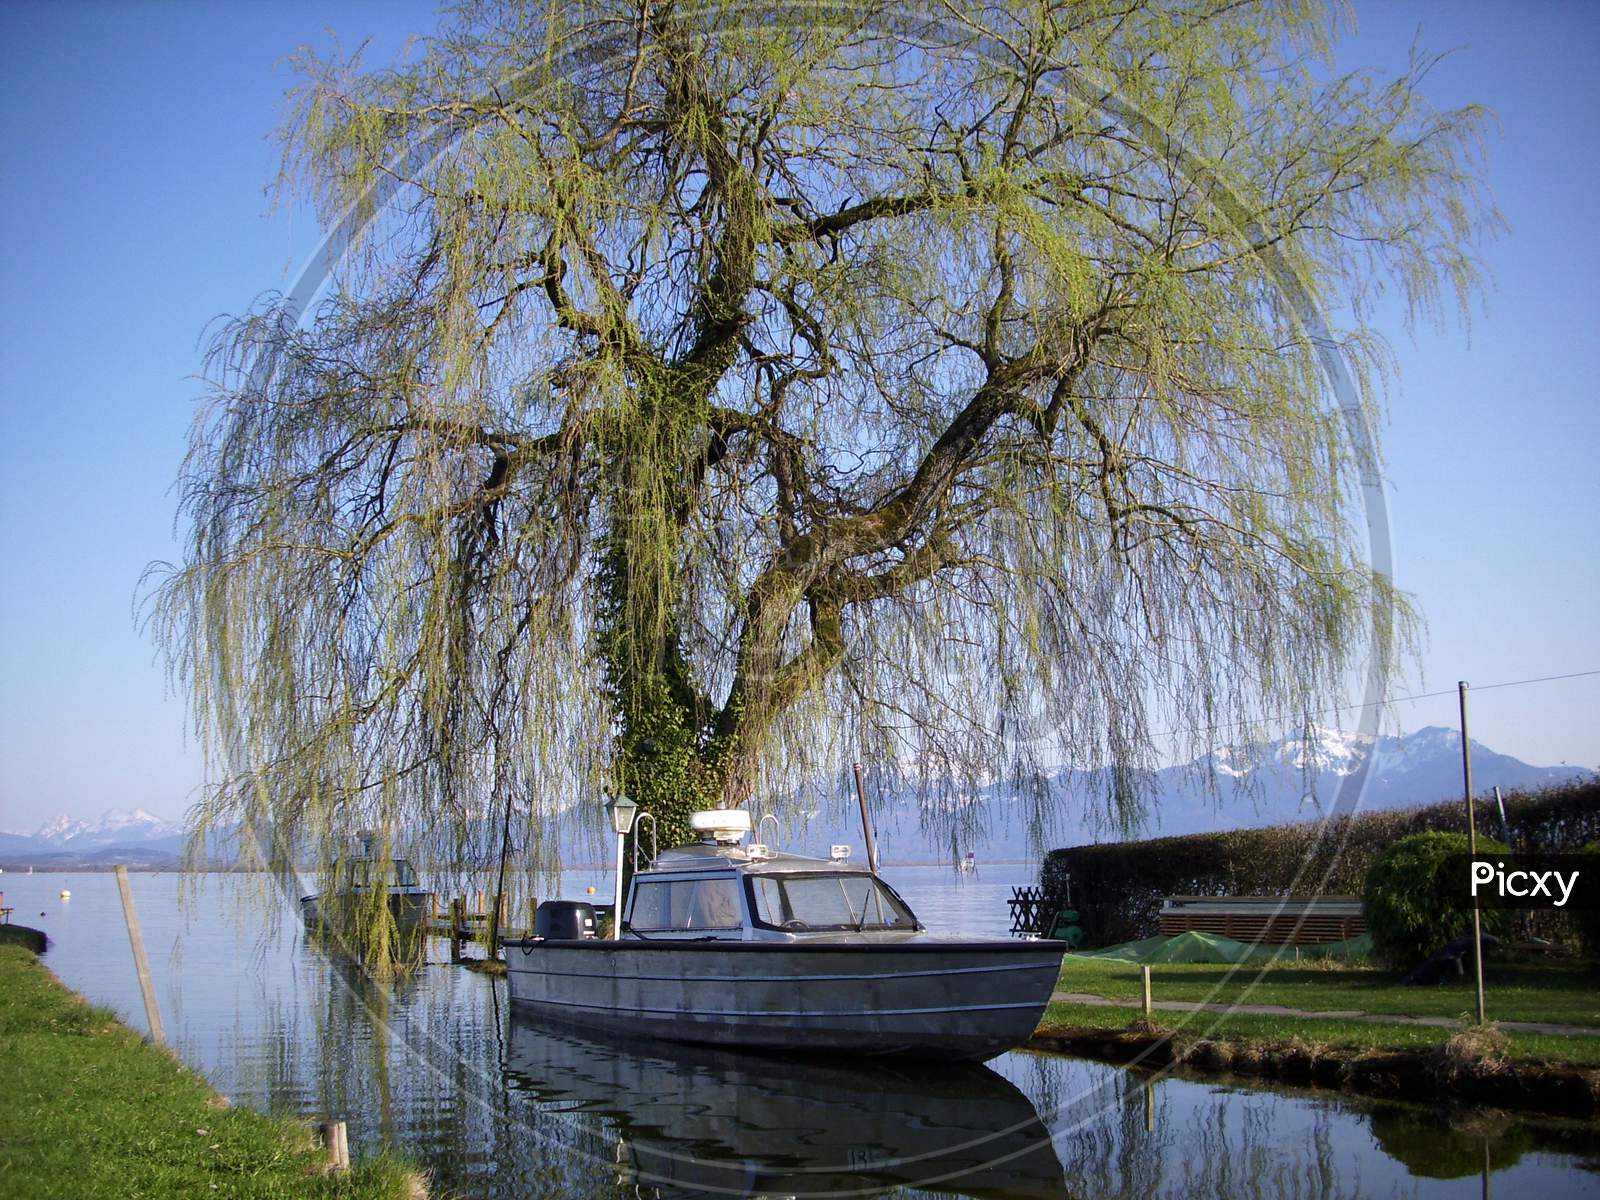 A fisher boat at the island Frauenchiemsee in the Bavarian lake called Chiemsee at a sunny day in summer.